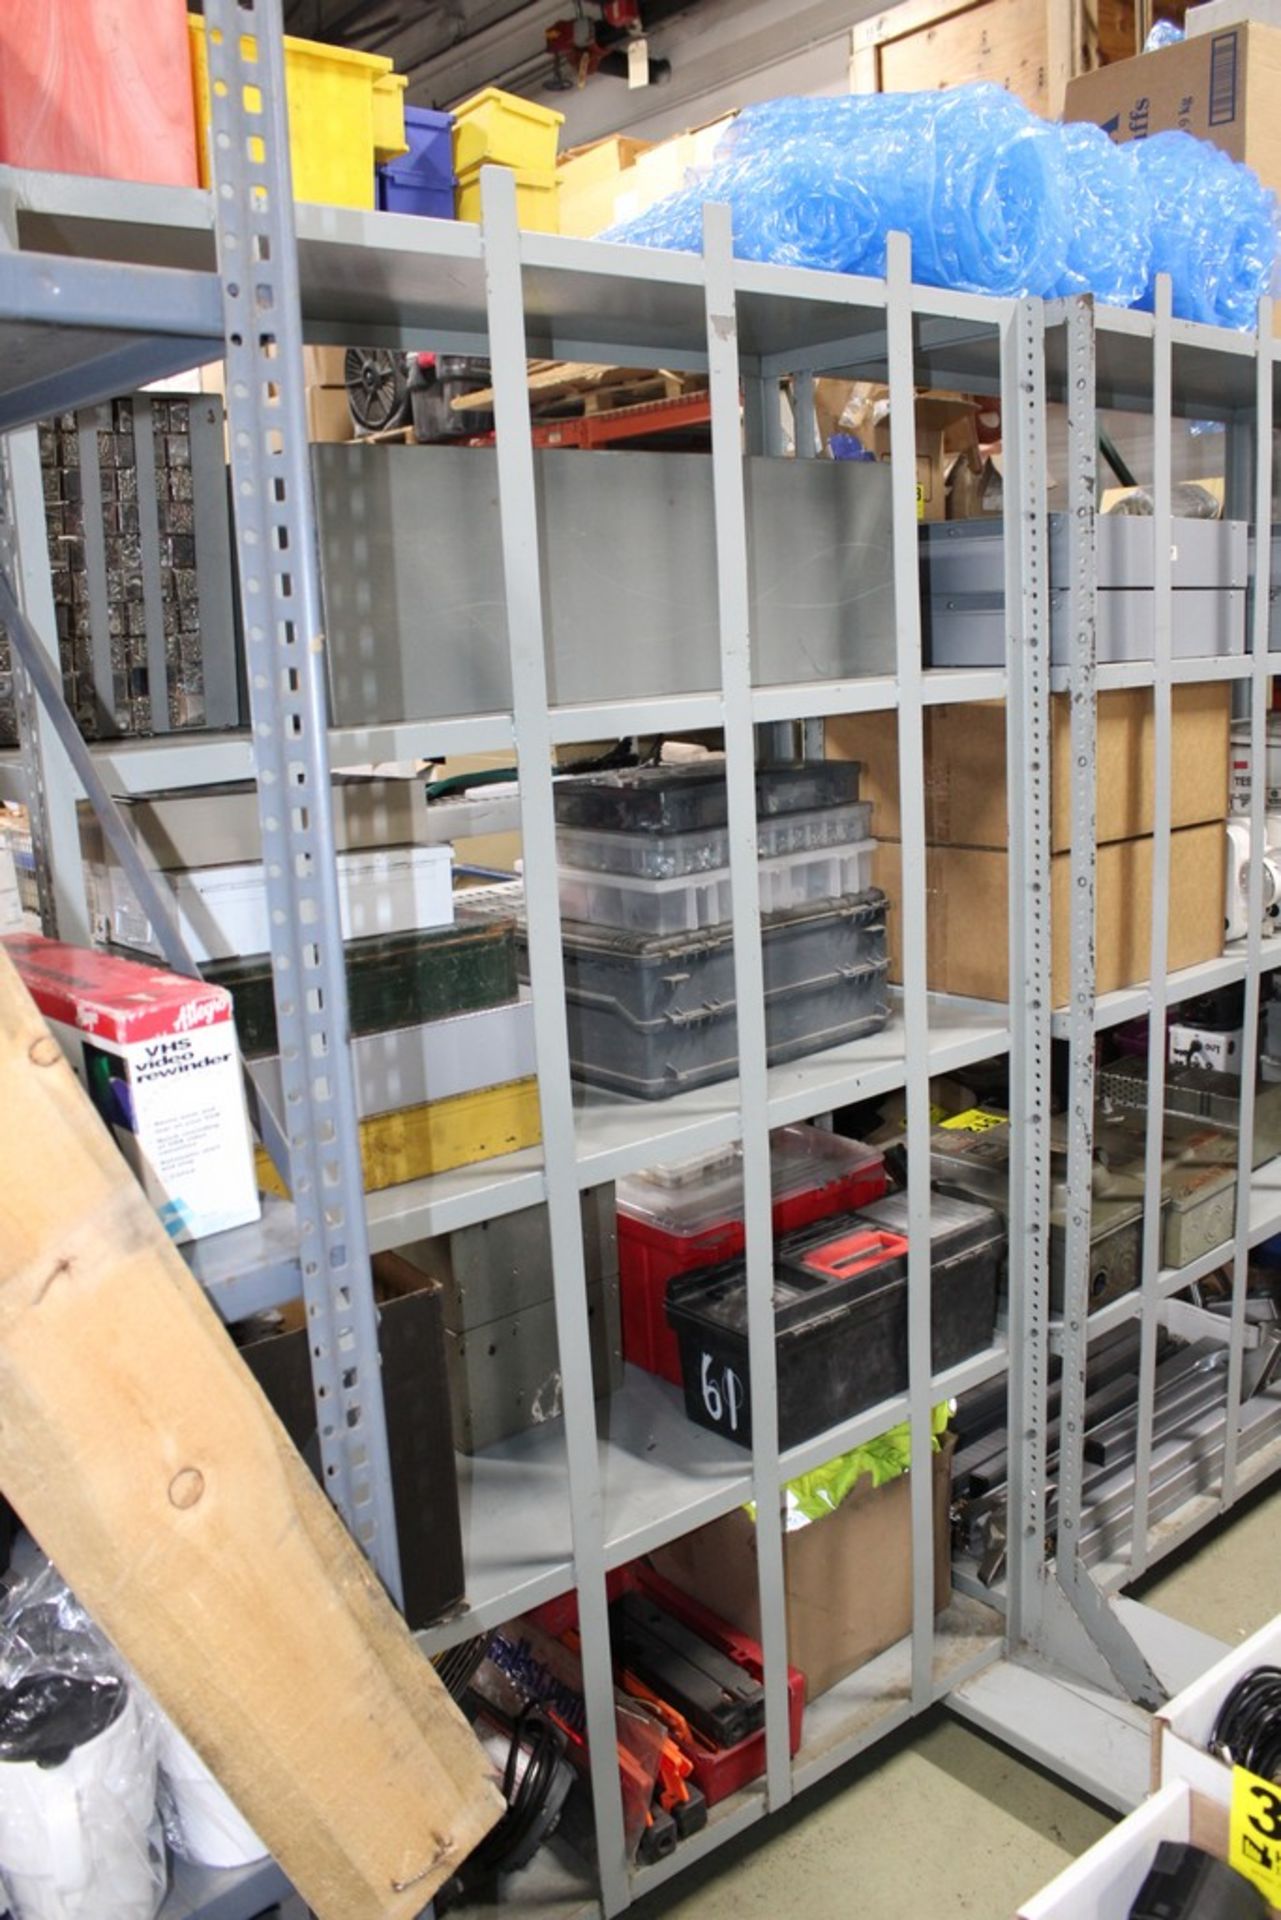 PORTABLE STEEL SHELVING UNIT, 49" S 22" X 76" - Image 2 of 2